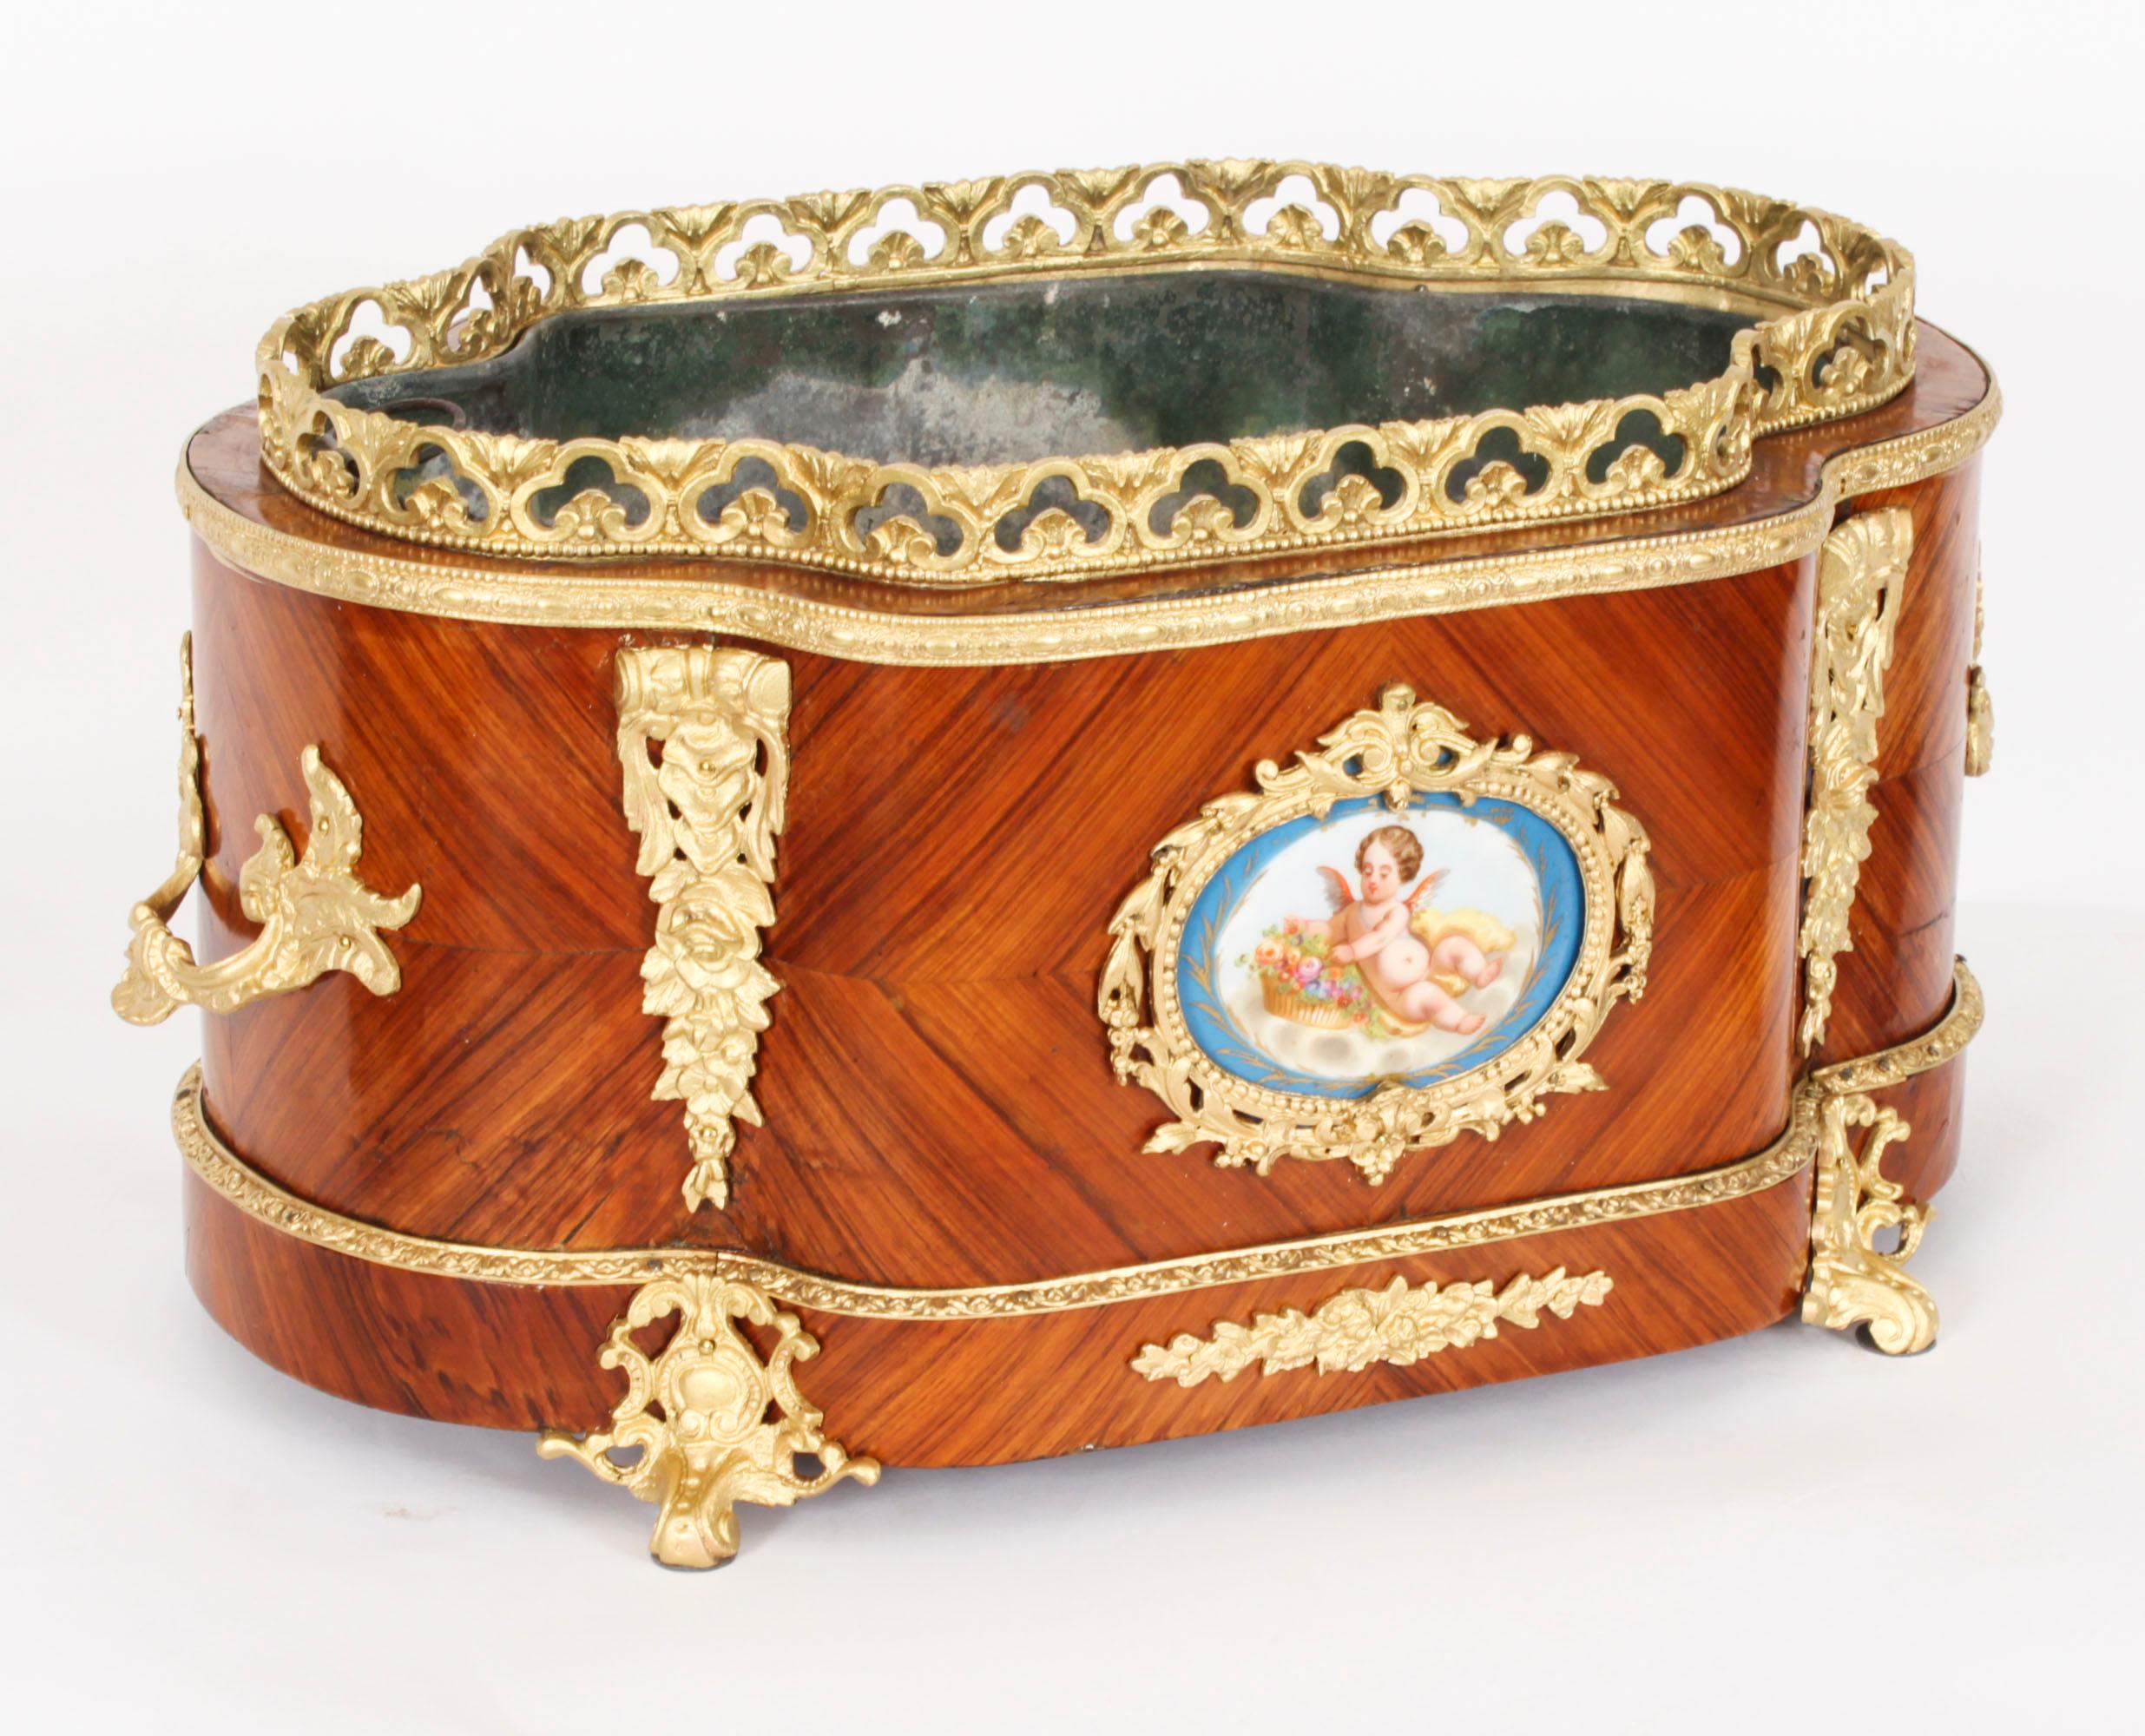 Antique French Sevres Porcelain Ormolu Mounted Planter Jardiniere 19th Century For Sale 11